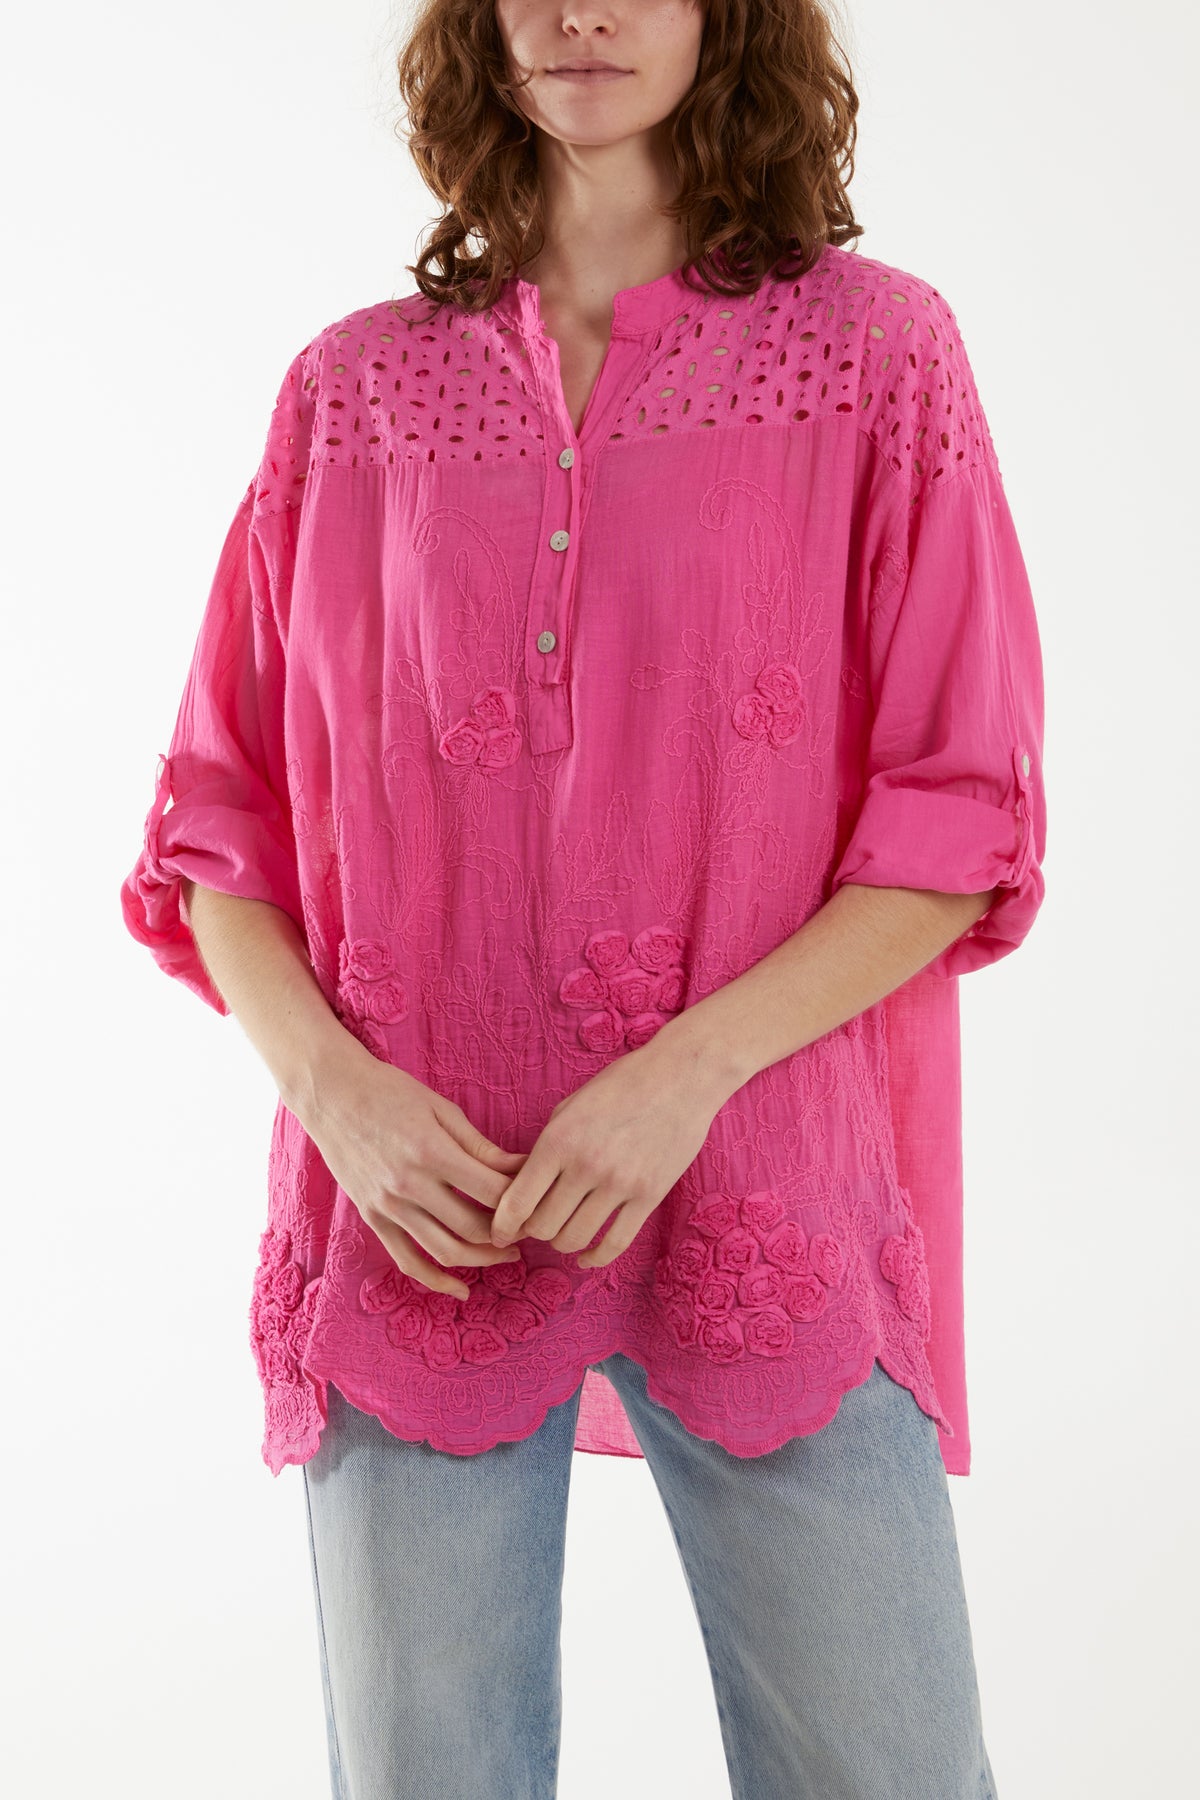 Broderie Anglaise 3D Flowers Blouse